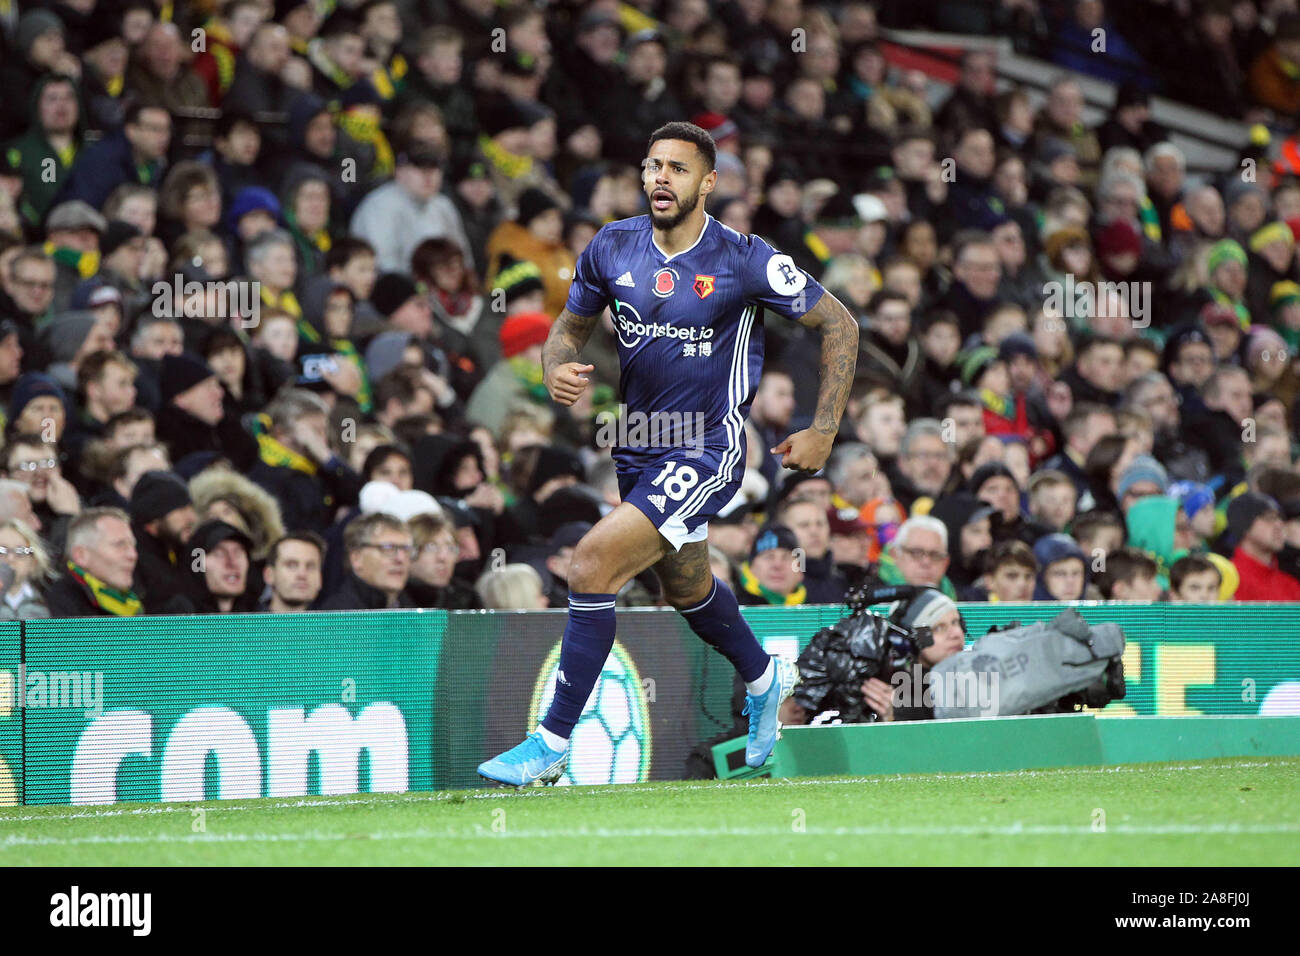 Norwich, UK. 08th Nov, 2019. Andre Gray of Watford celebrates getting the second goal of the game for Watford during the Premier League match between Norwich City and Watford at Carrow Road on November 8th 2019 in Norwich, England. (Photo by Mick Kearns/phcimages.com) Credit: PHC Images/Alamy Live News Stock Photo